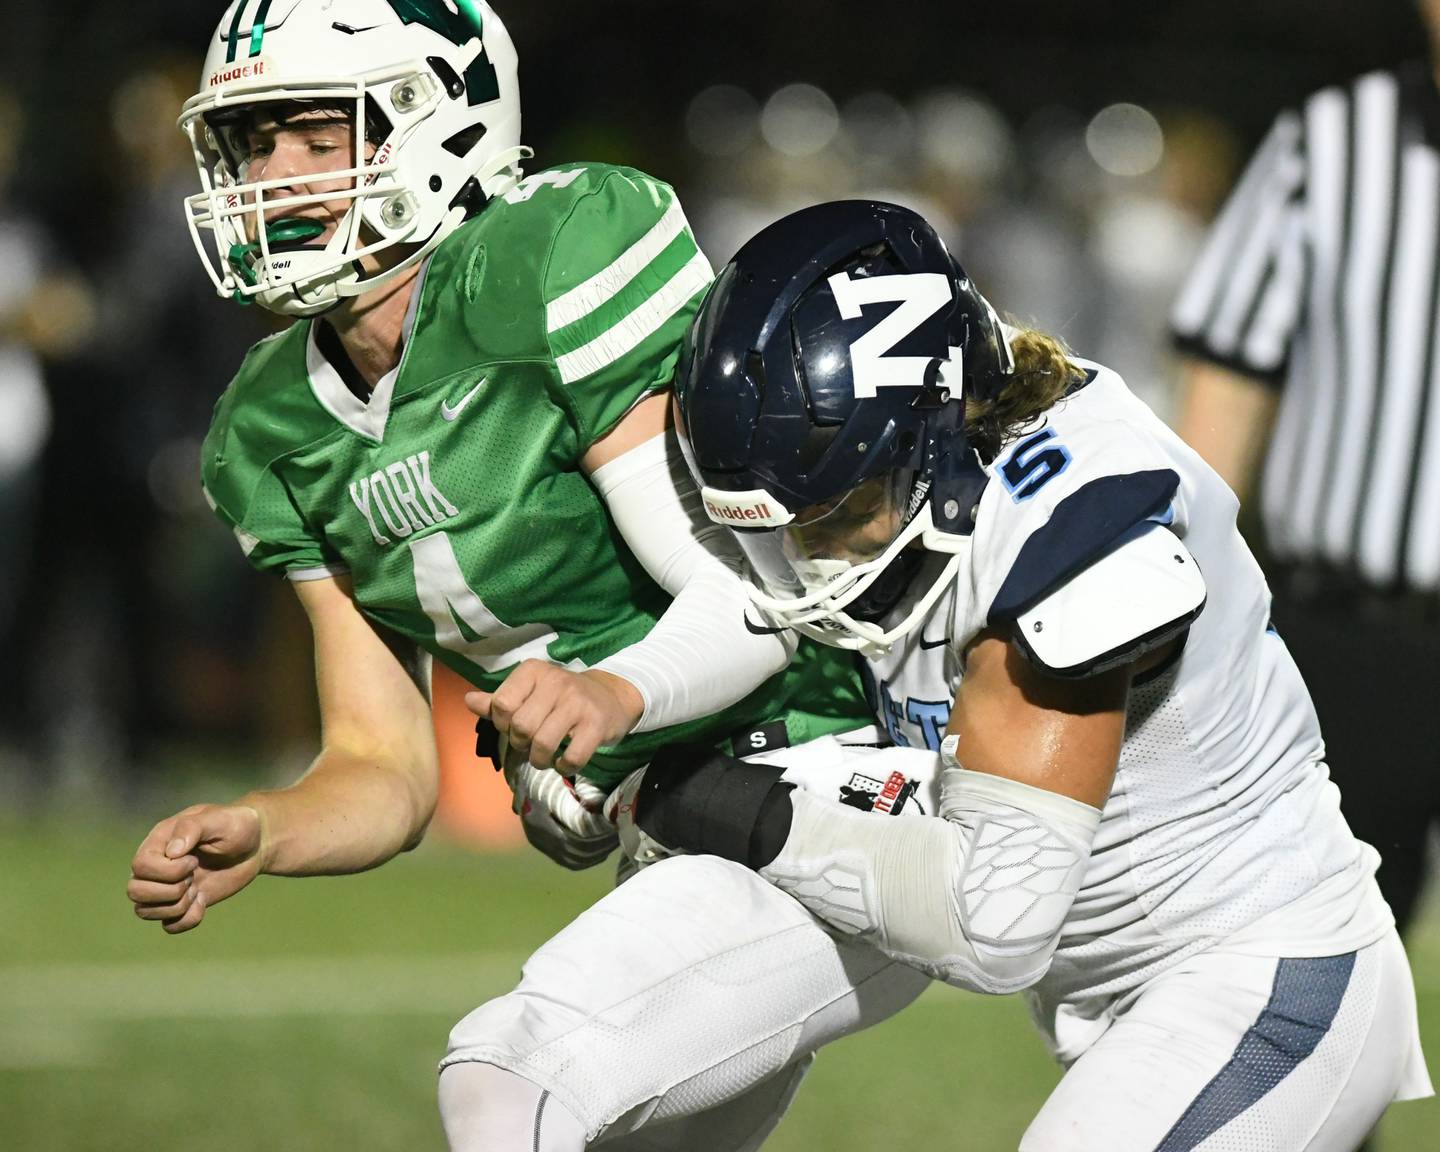 Nazareth Academy’s Gabe Kaminski (5) tries to tackle York’s QB Sean Winton before getting a pass off during the second quarter on Friday Sep. 1, 2023, in Elmhurst.